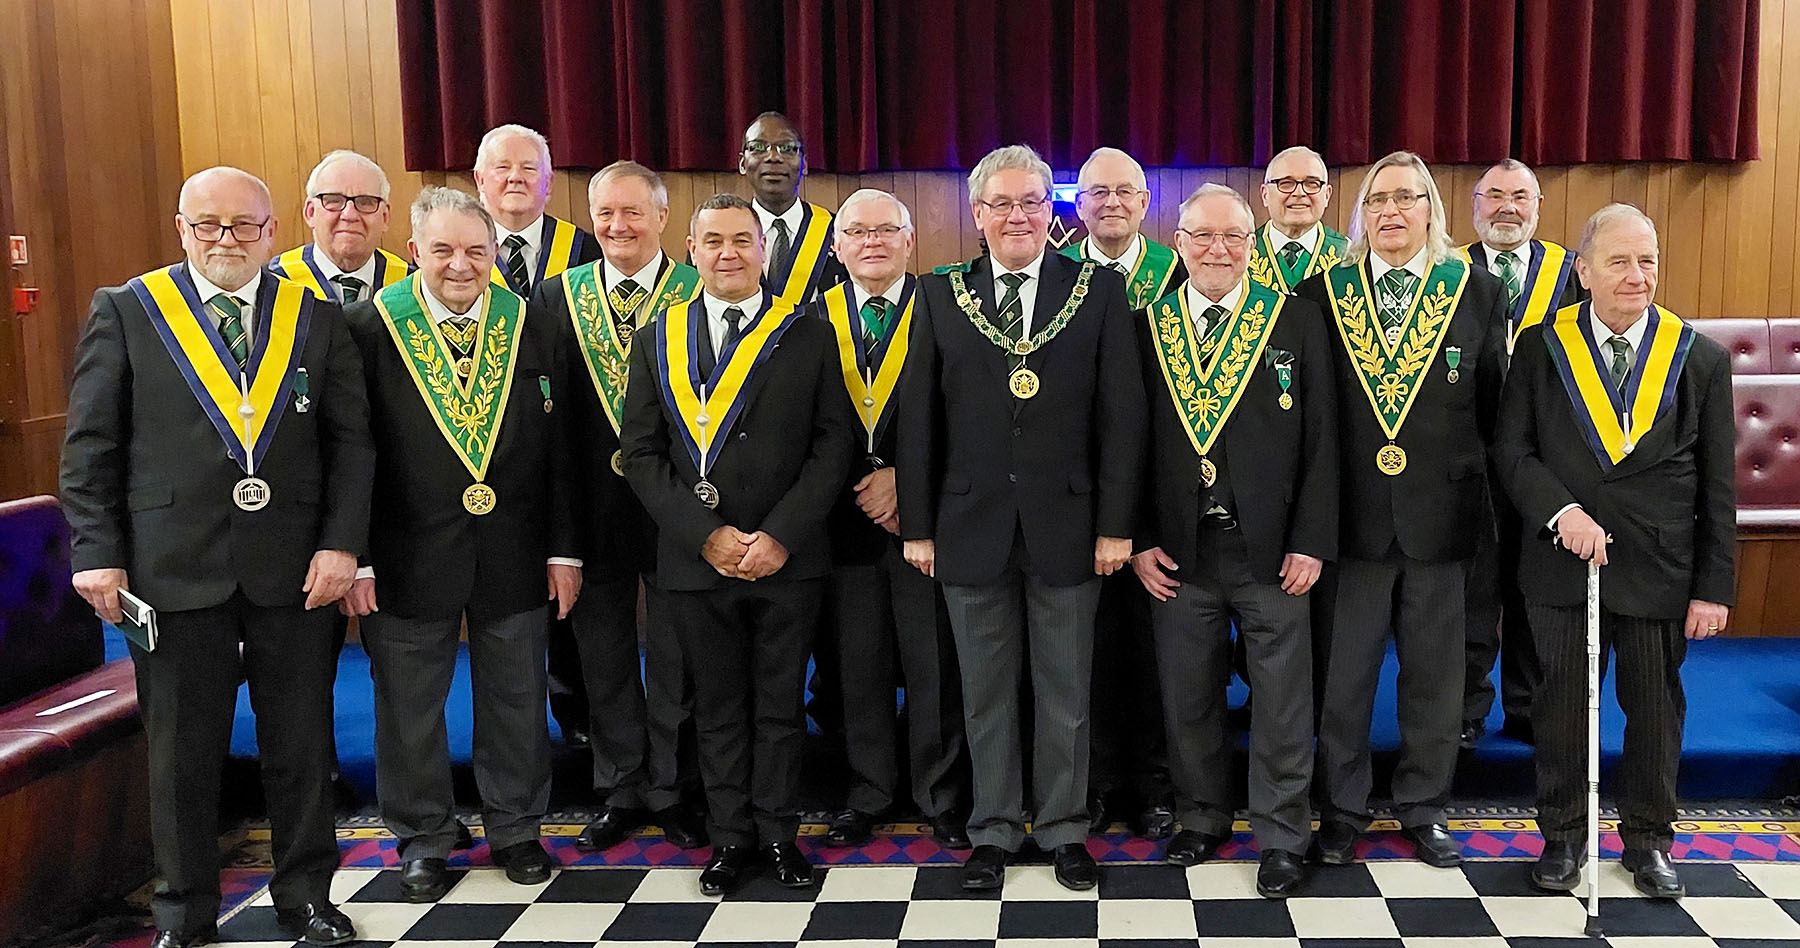 The District Grand Prefect with members of the White Cliffs of Dover Council